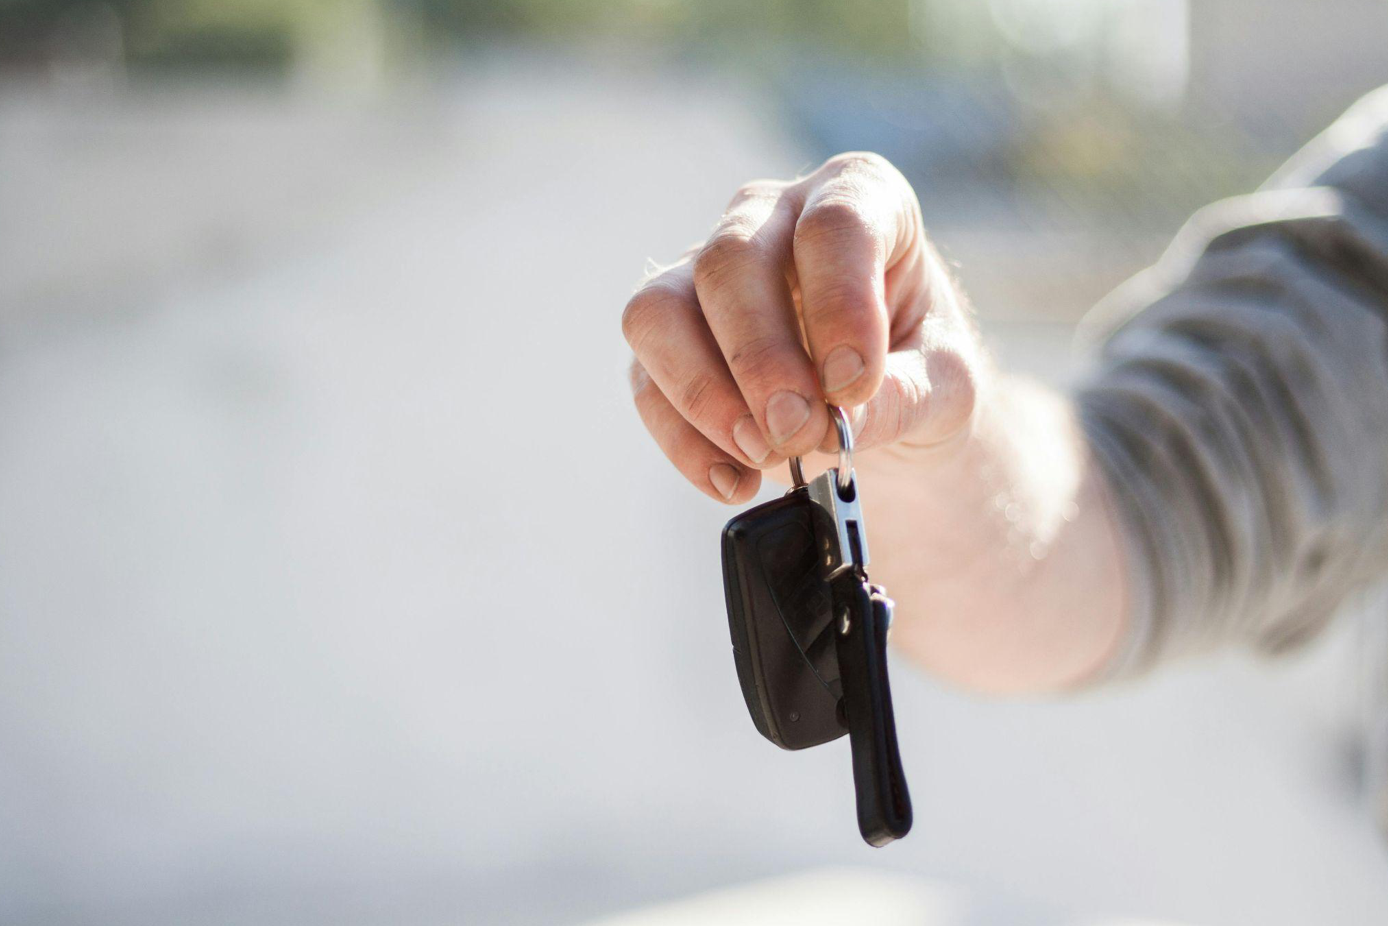 Man in grey shirt holding out car keys; image by Negative Space, via Pexels.com.